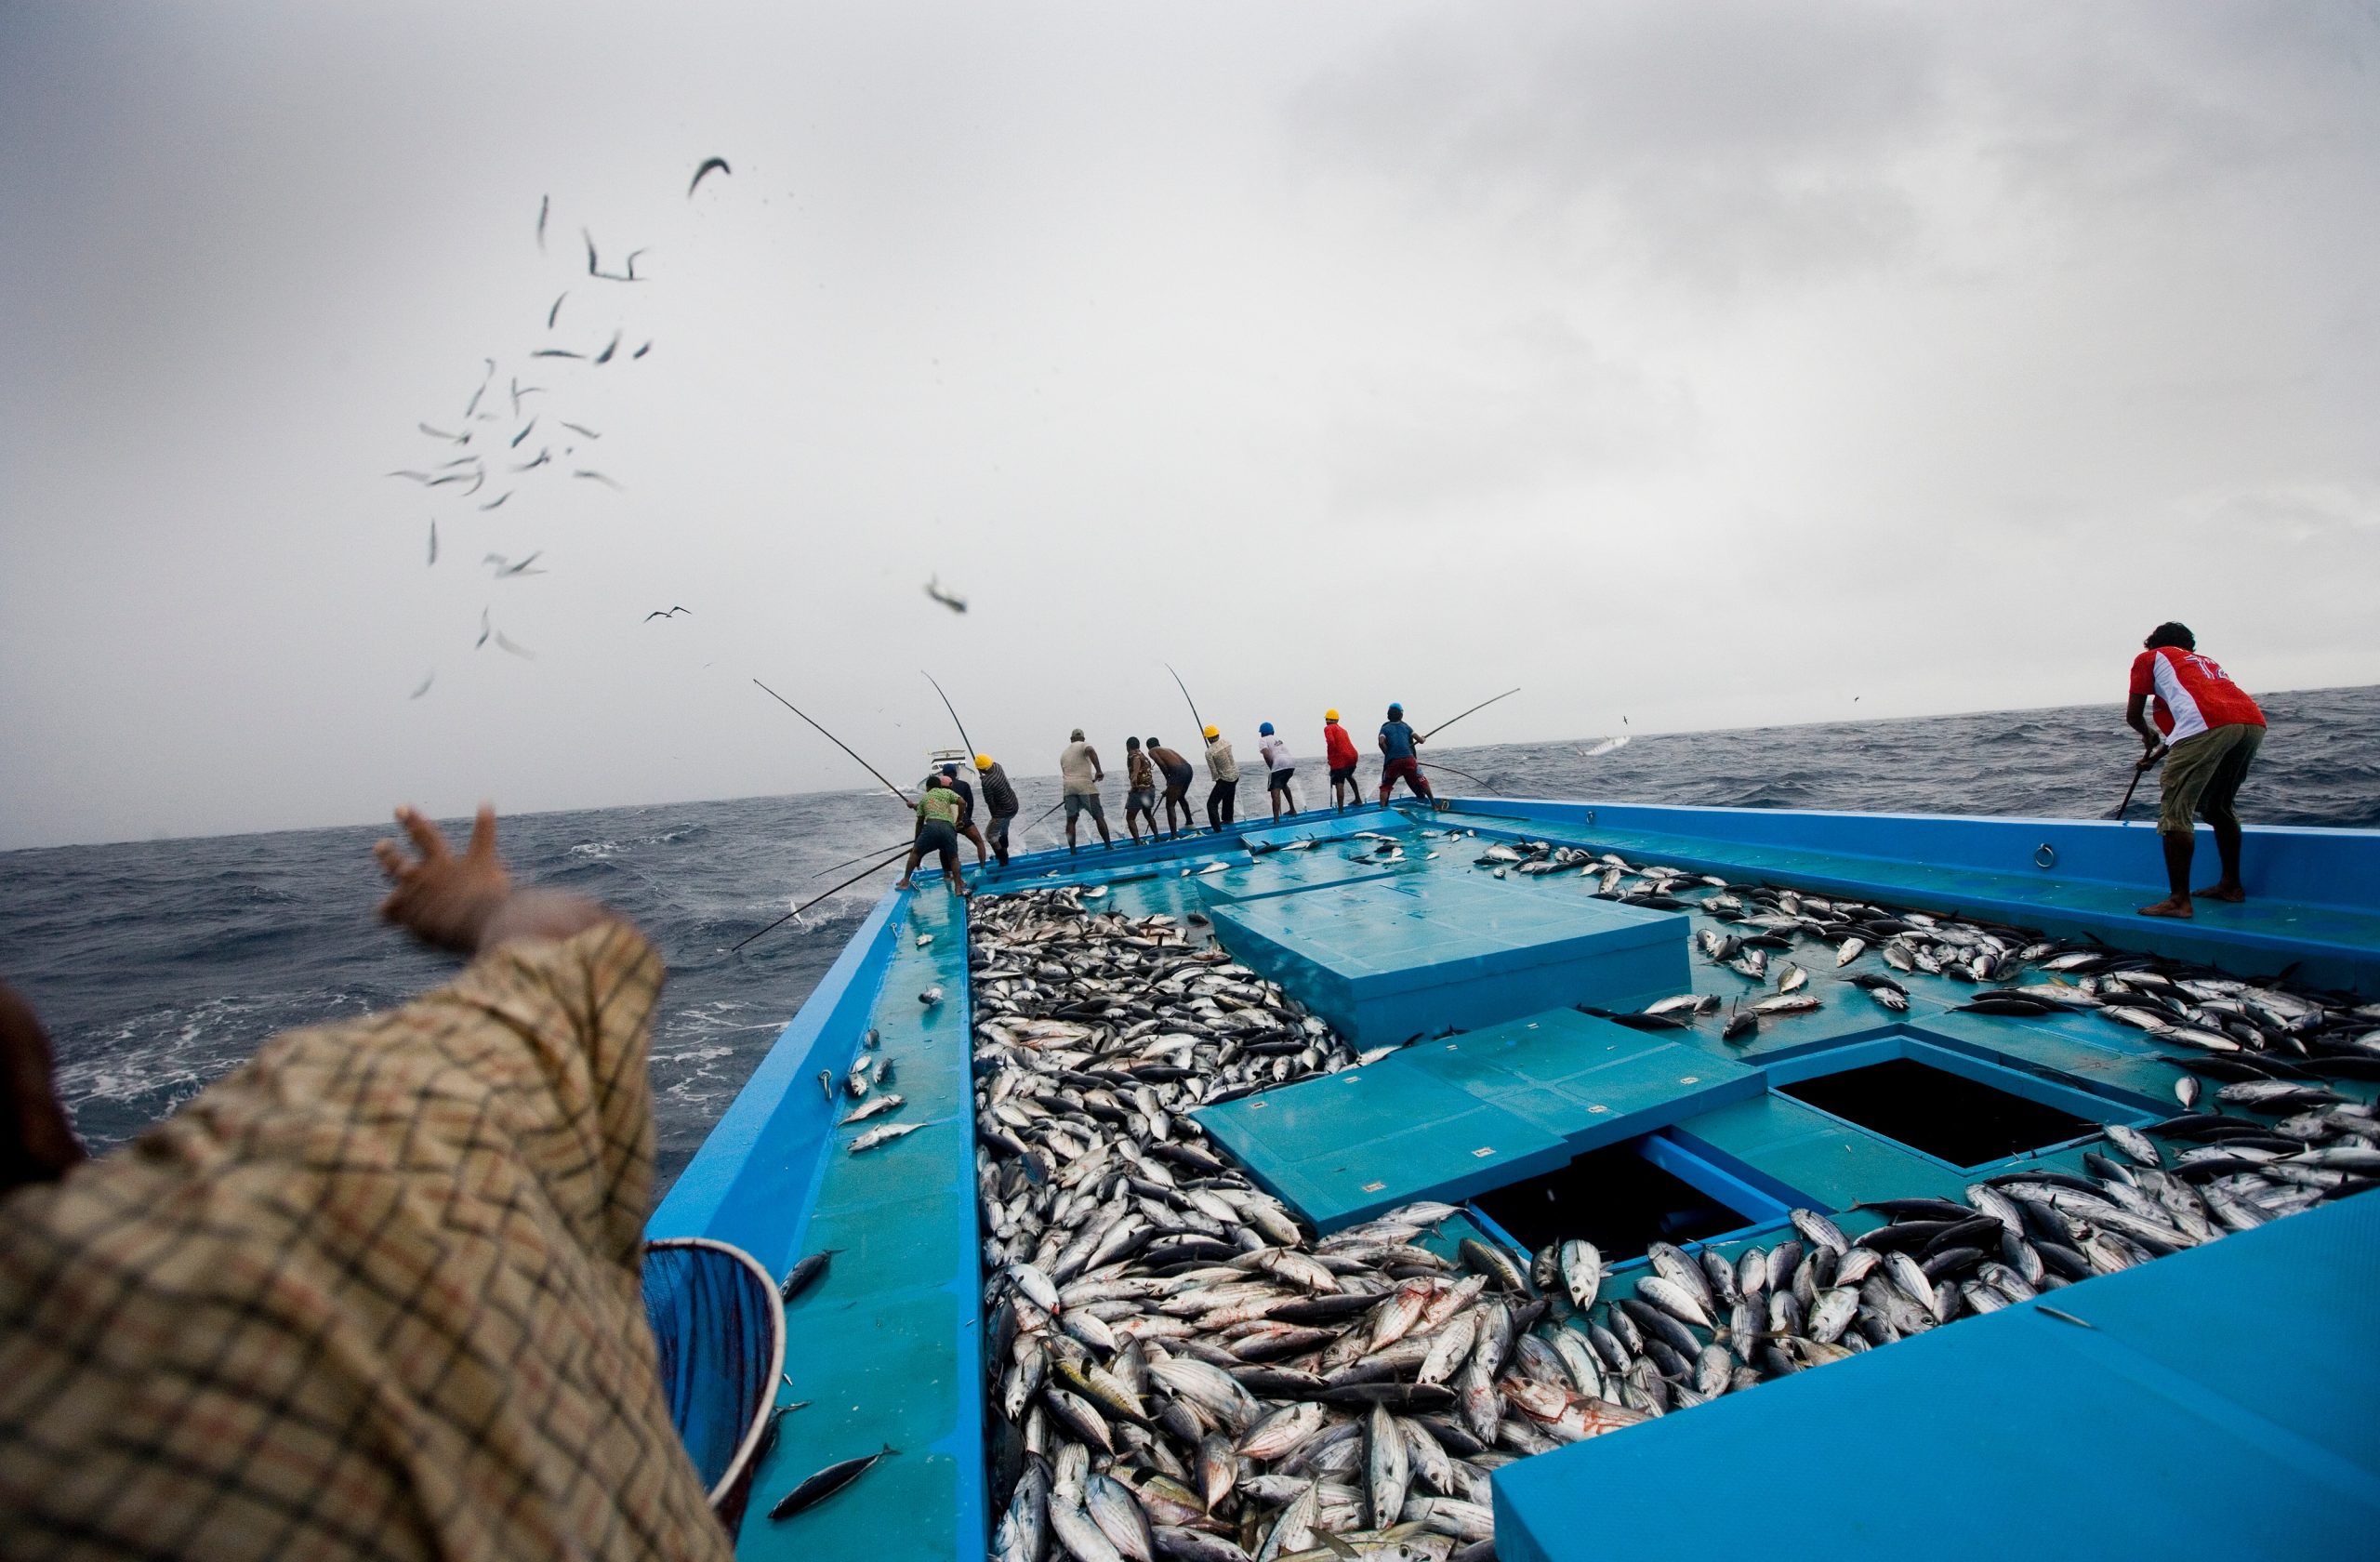 Ten tuna fishers use pole and line method to catch tuna in open water. There are hundreds of tuna on their boat.